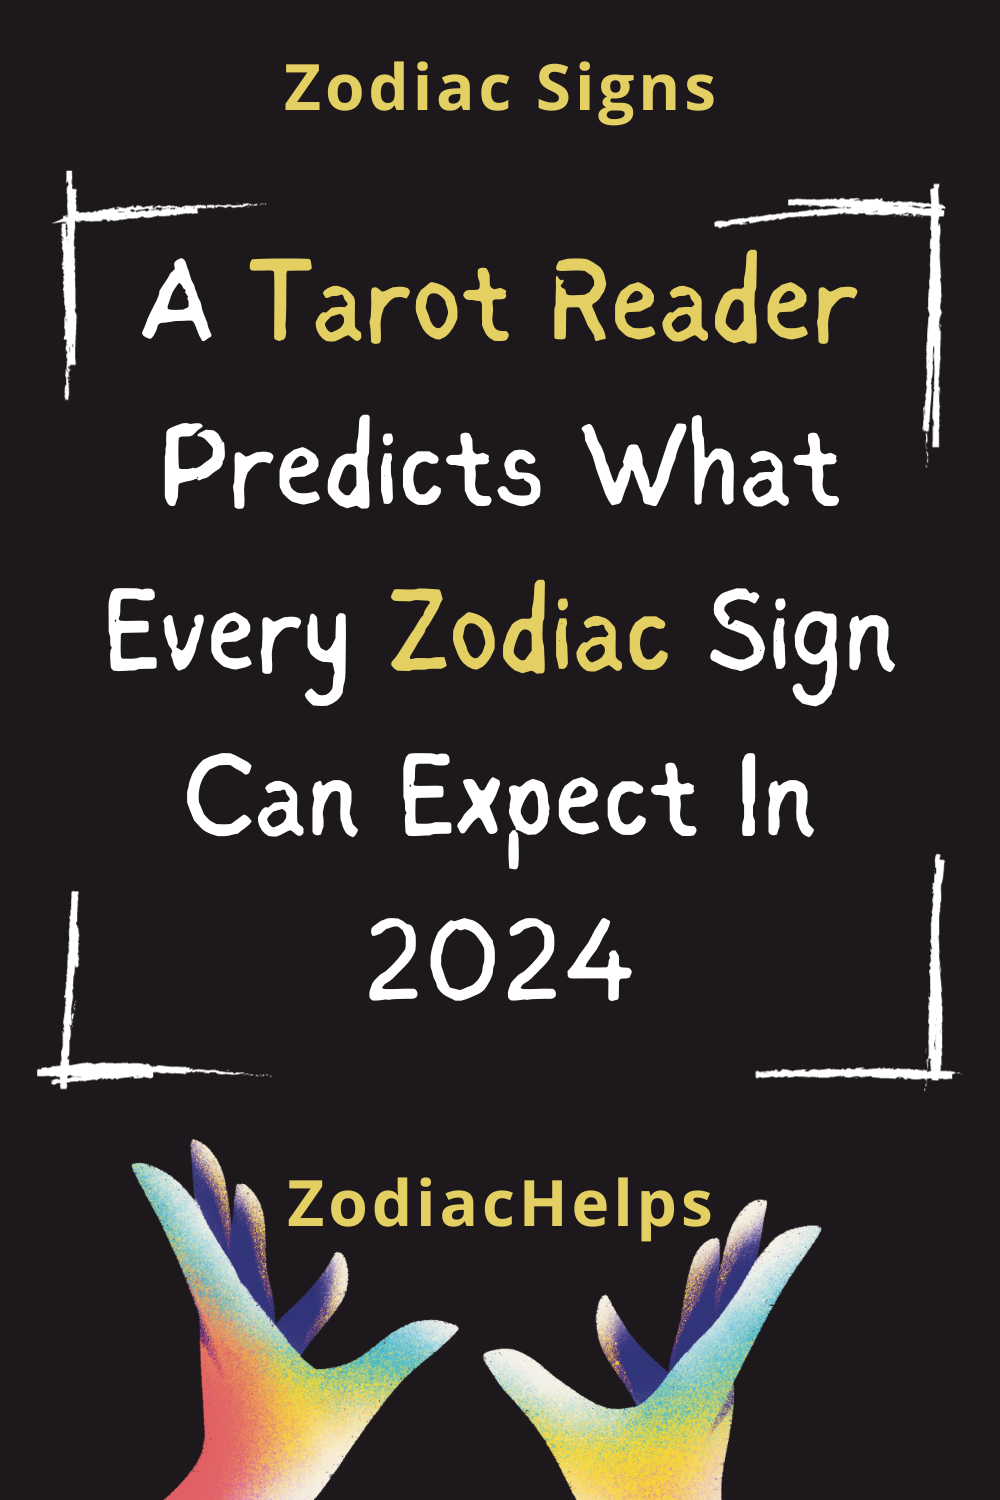 A Tarot Reader Predicts What Every Zodiac Sign Can Expect In 2024